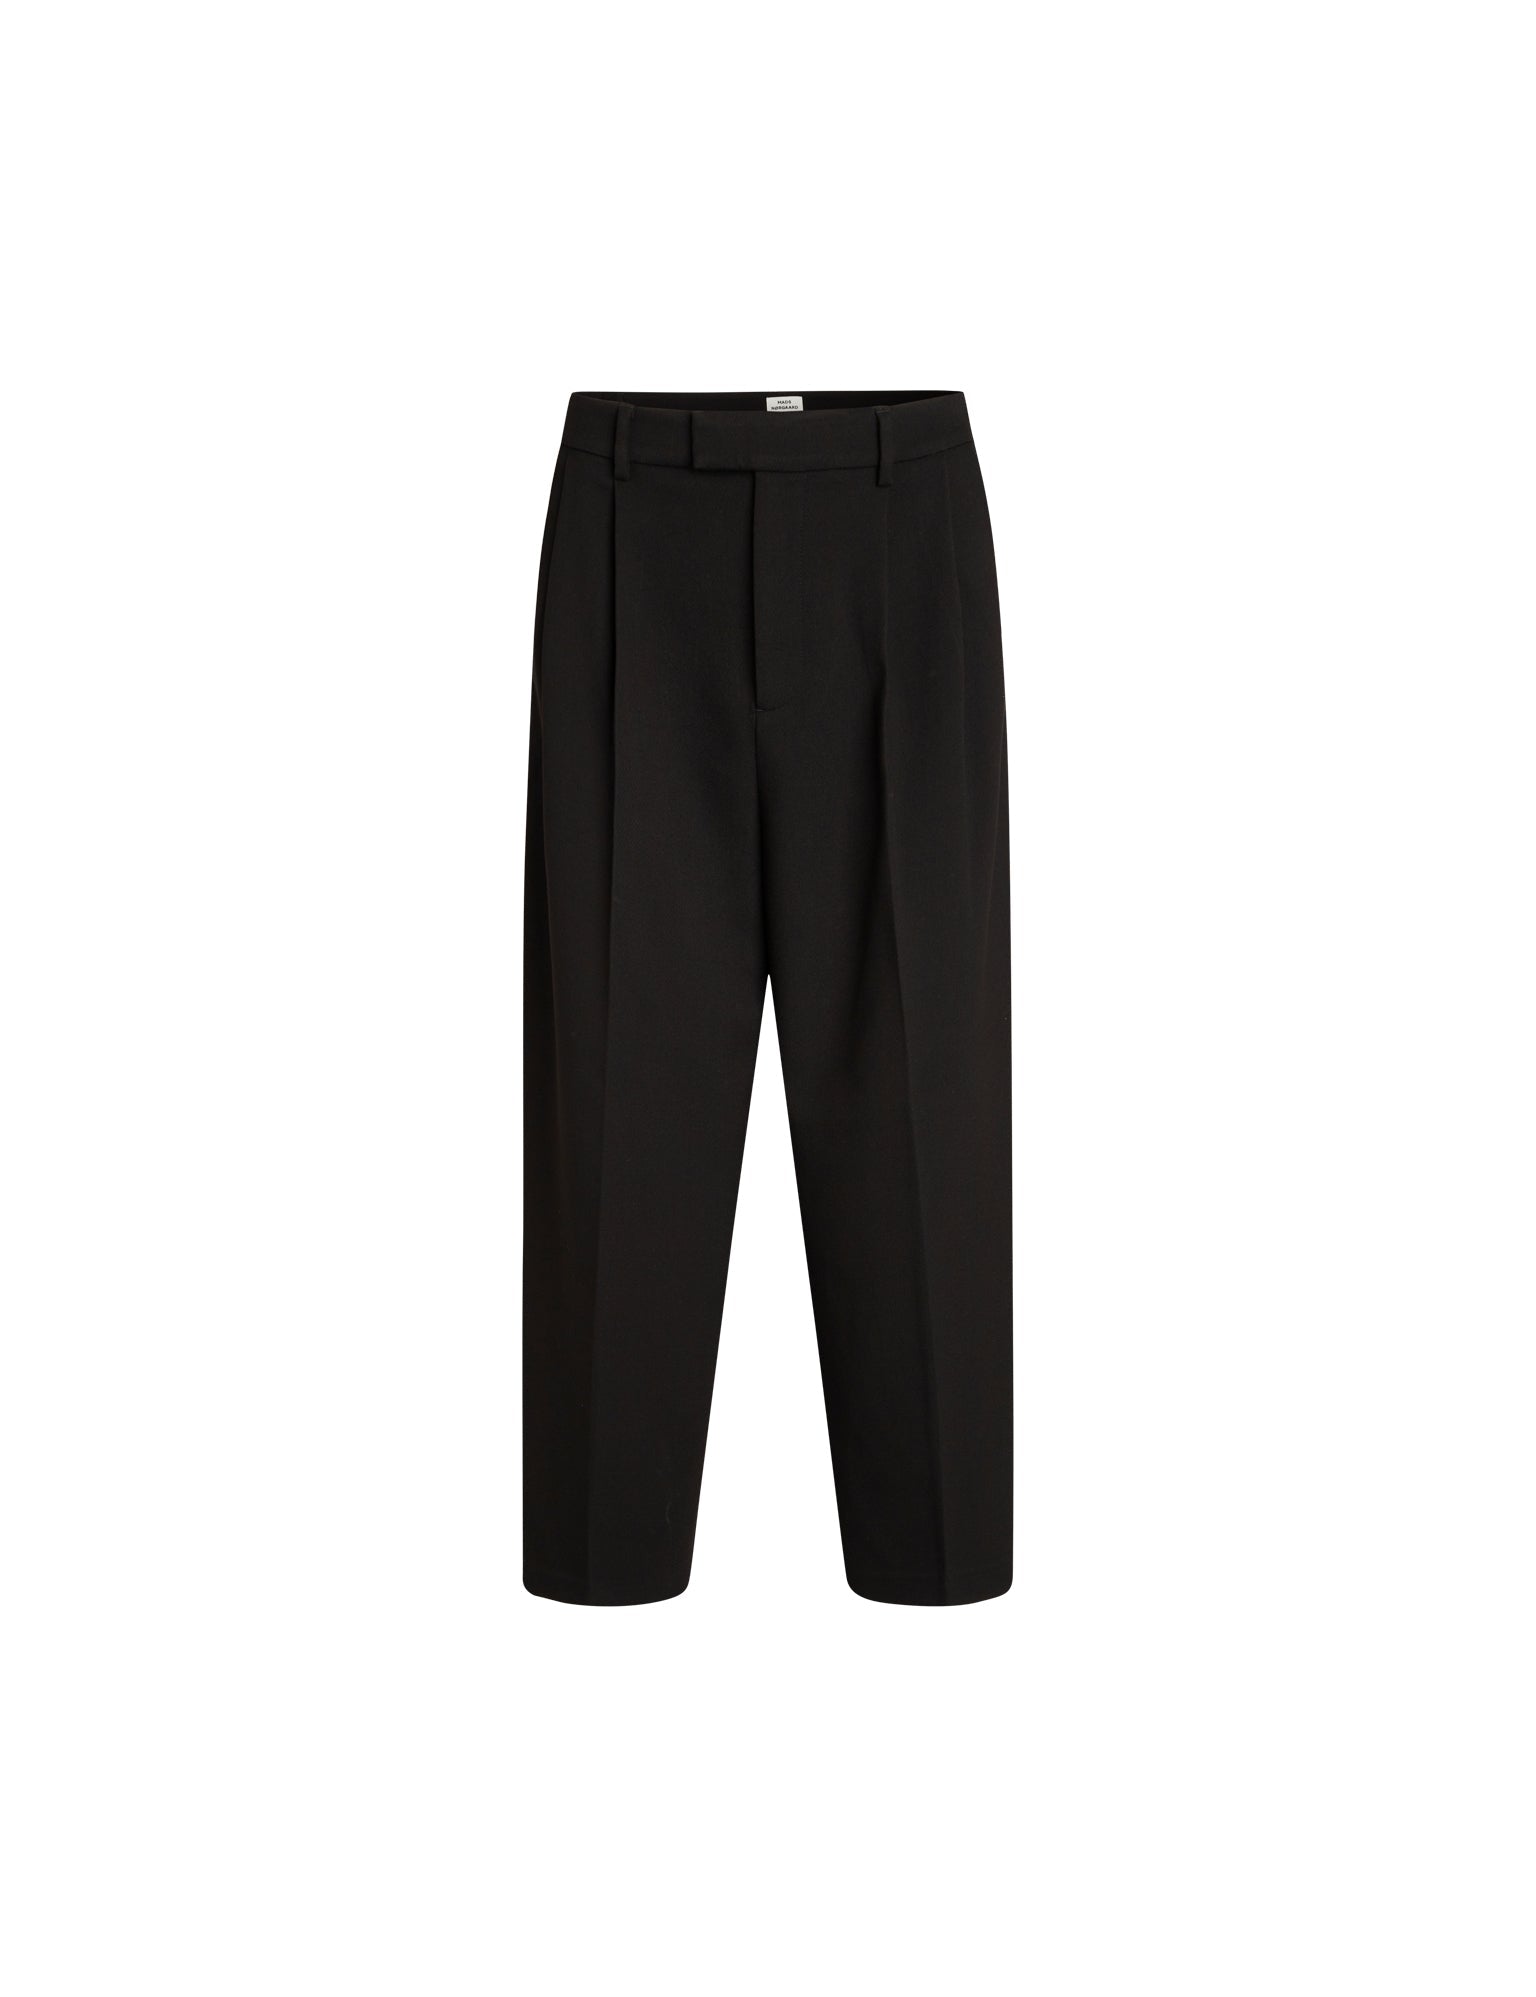 SOFT SUITING PANTS IN BLACK